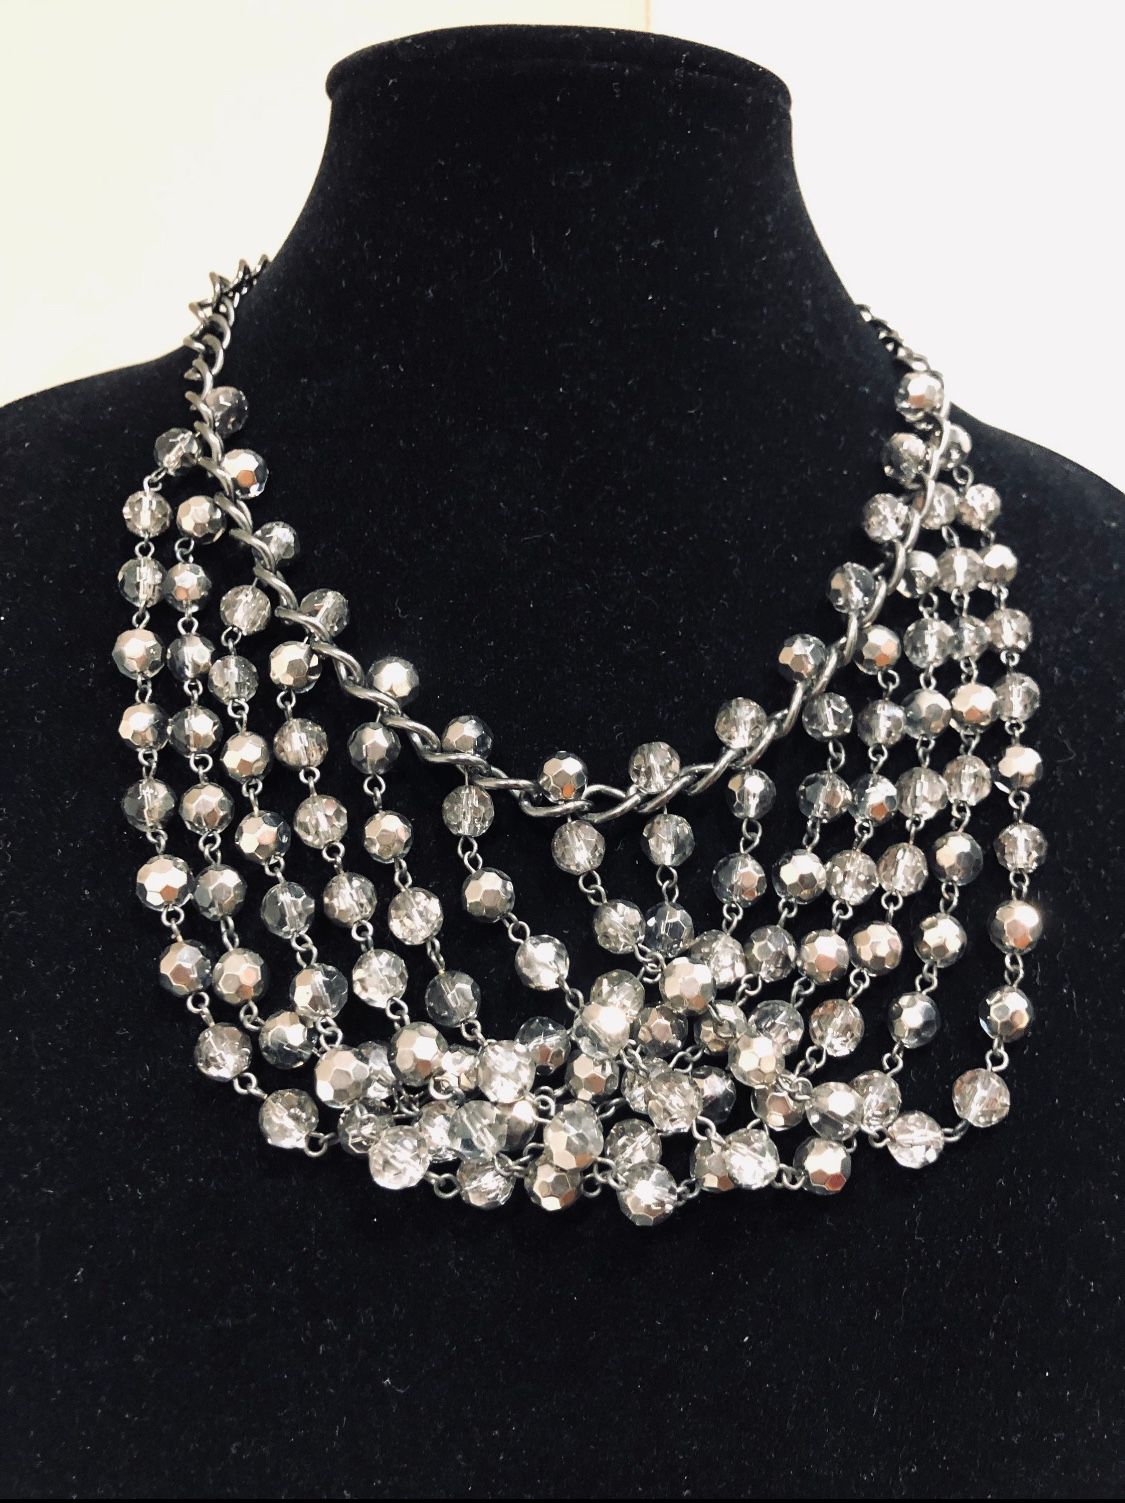 Edwardian glass Collar - Queens silver bead Necklace - wide 6 strand choker - Runway statement necklace - Dramatic collar